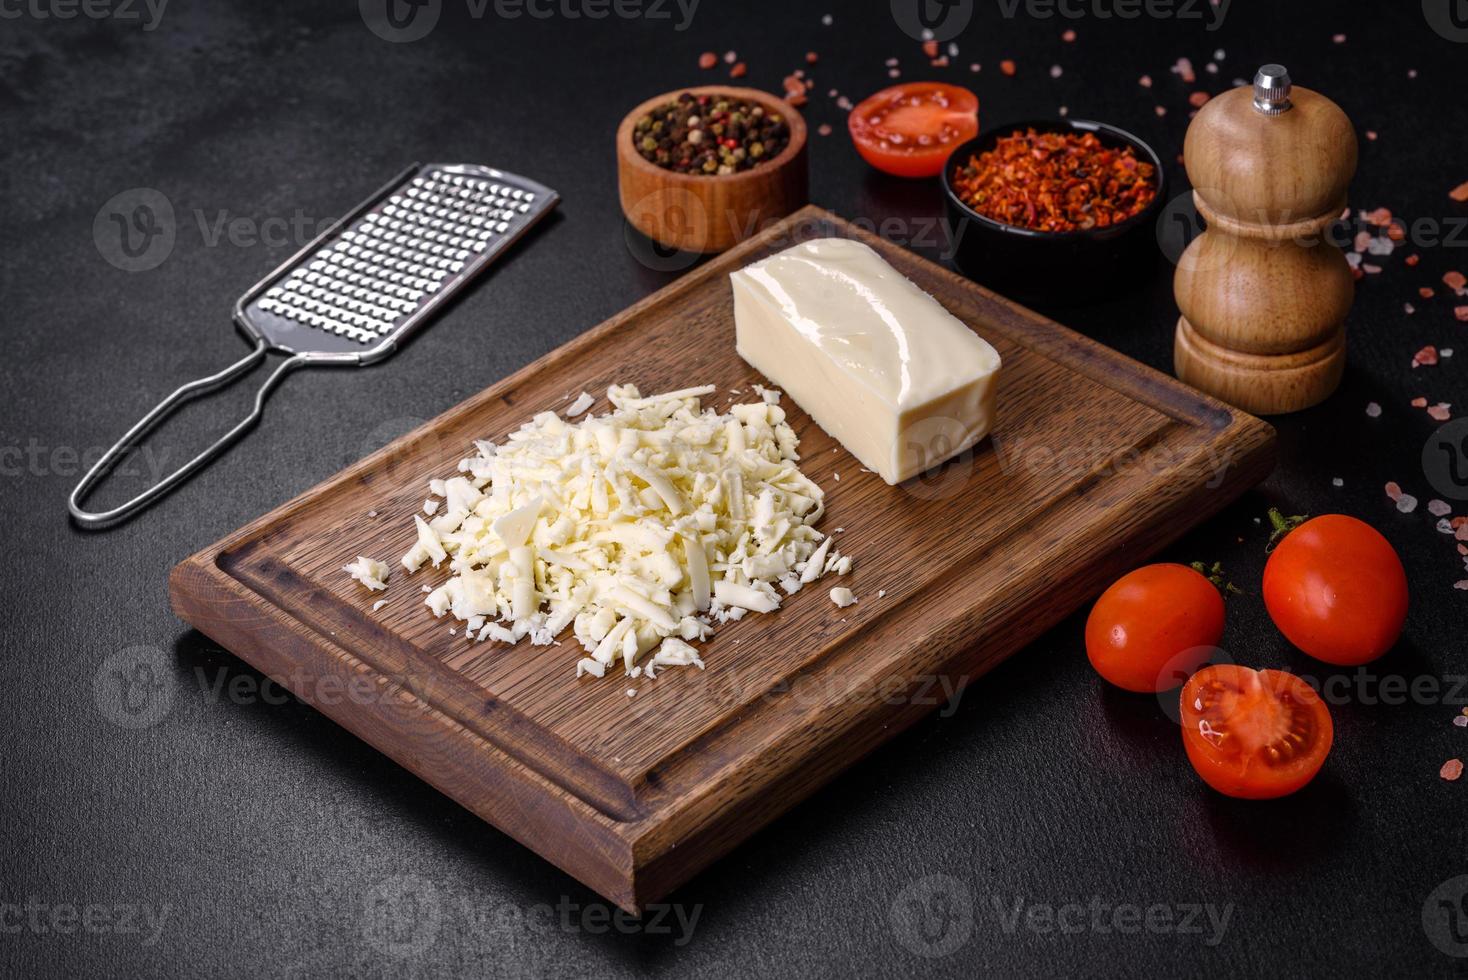 Image of a bar and grated mozzarella cheese on a dark background photo